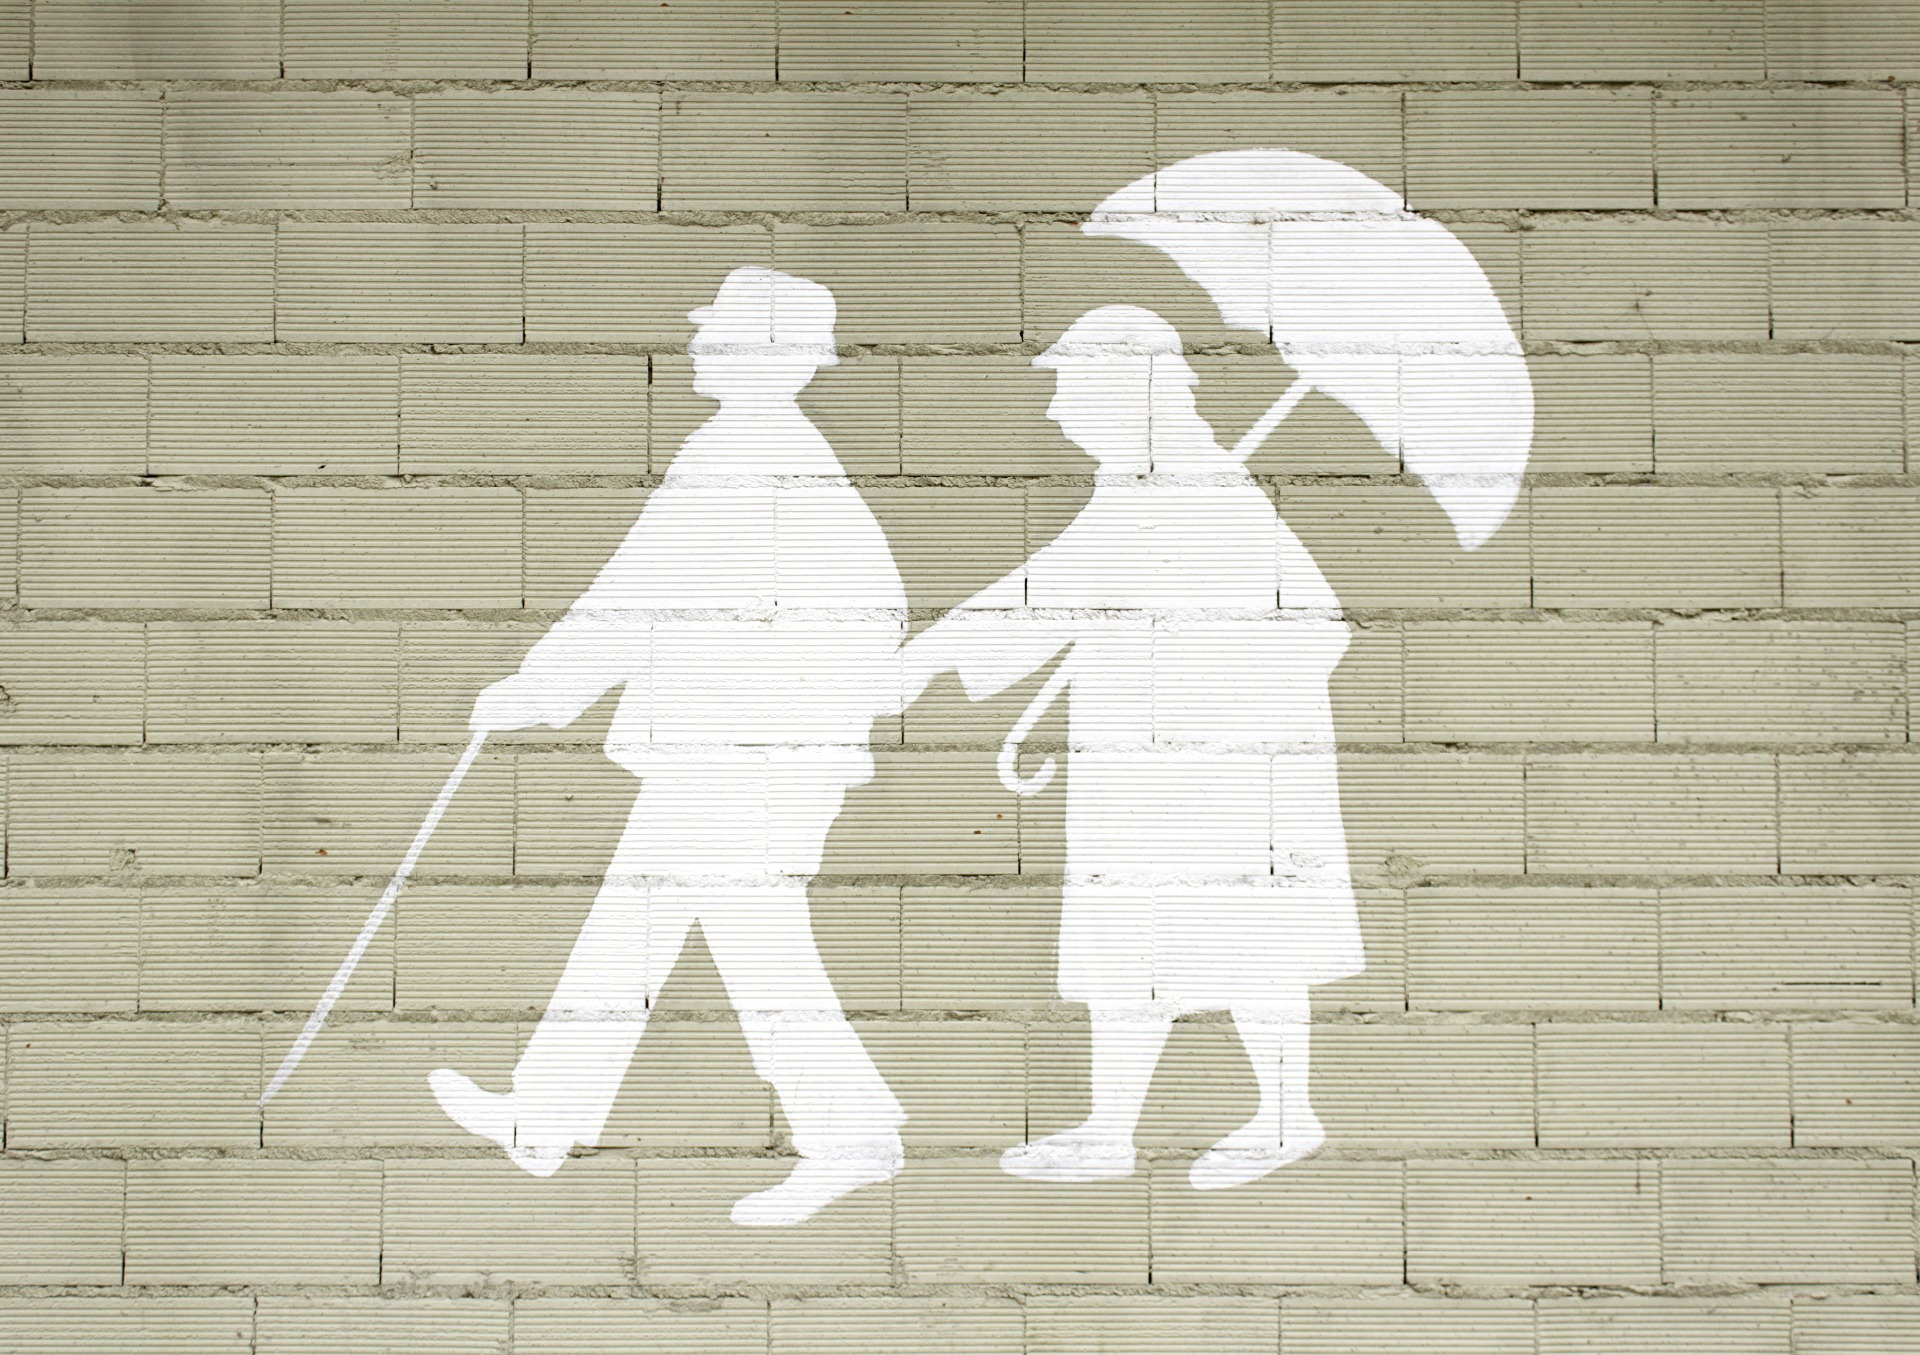 A painting of two people, one with a walking stick and the other holding an umbrella.